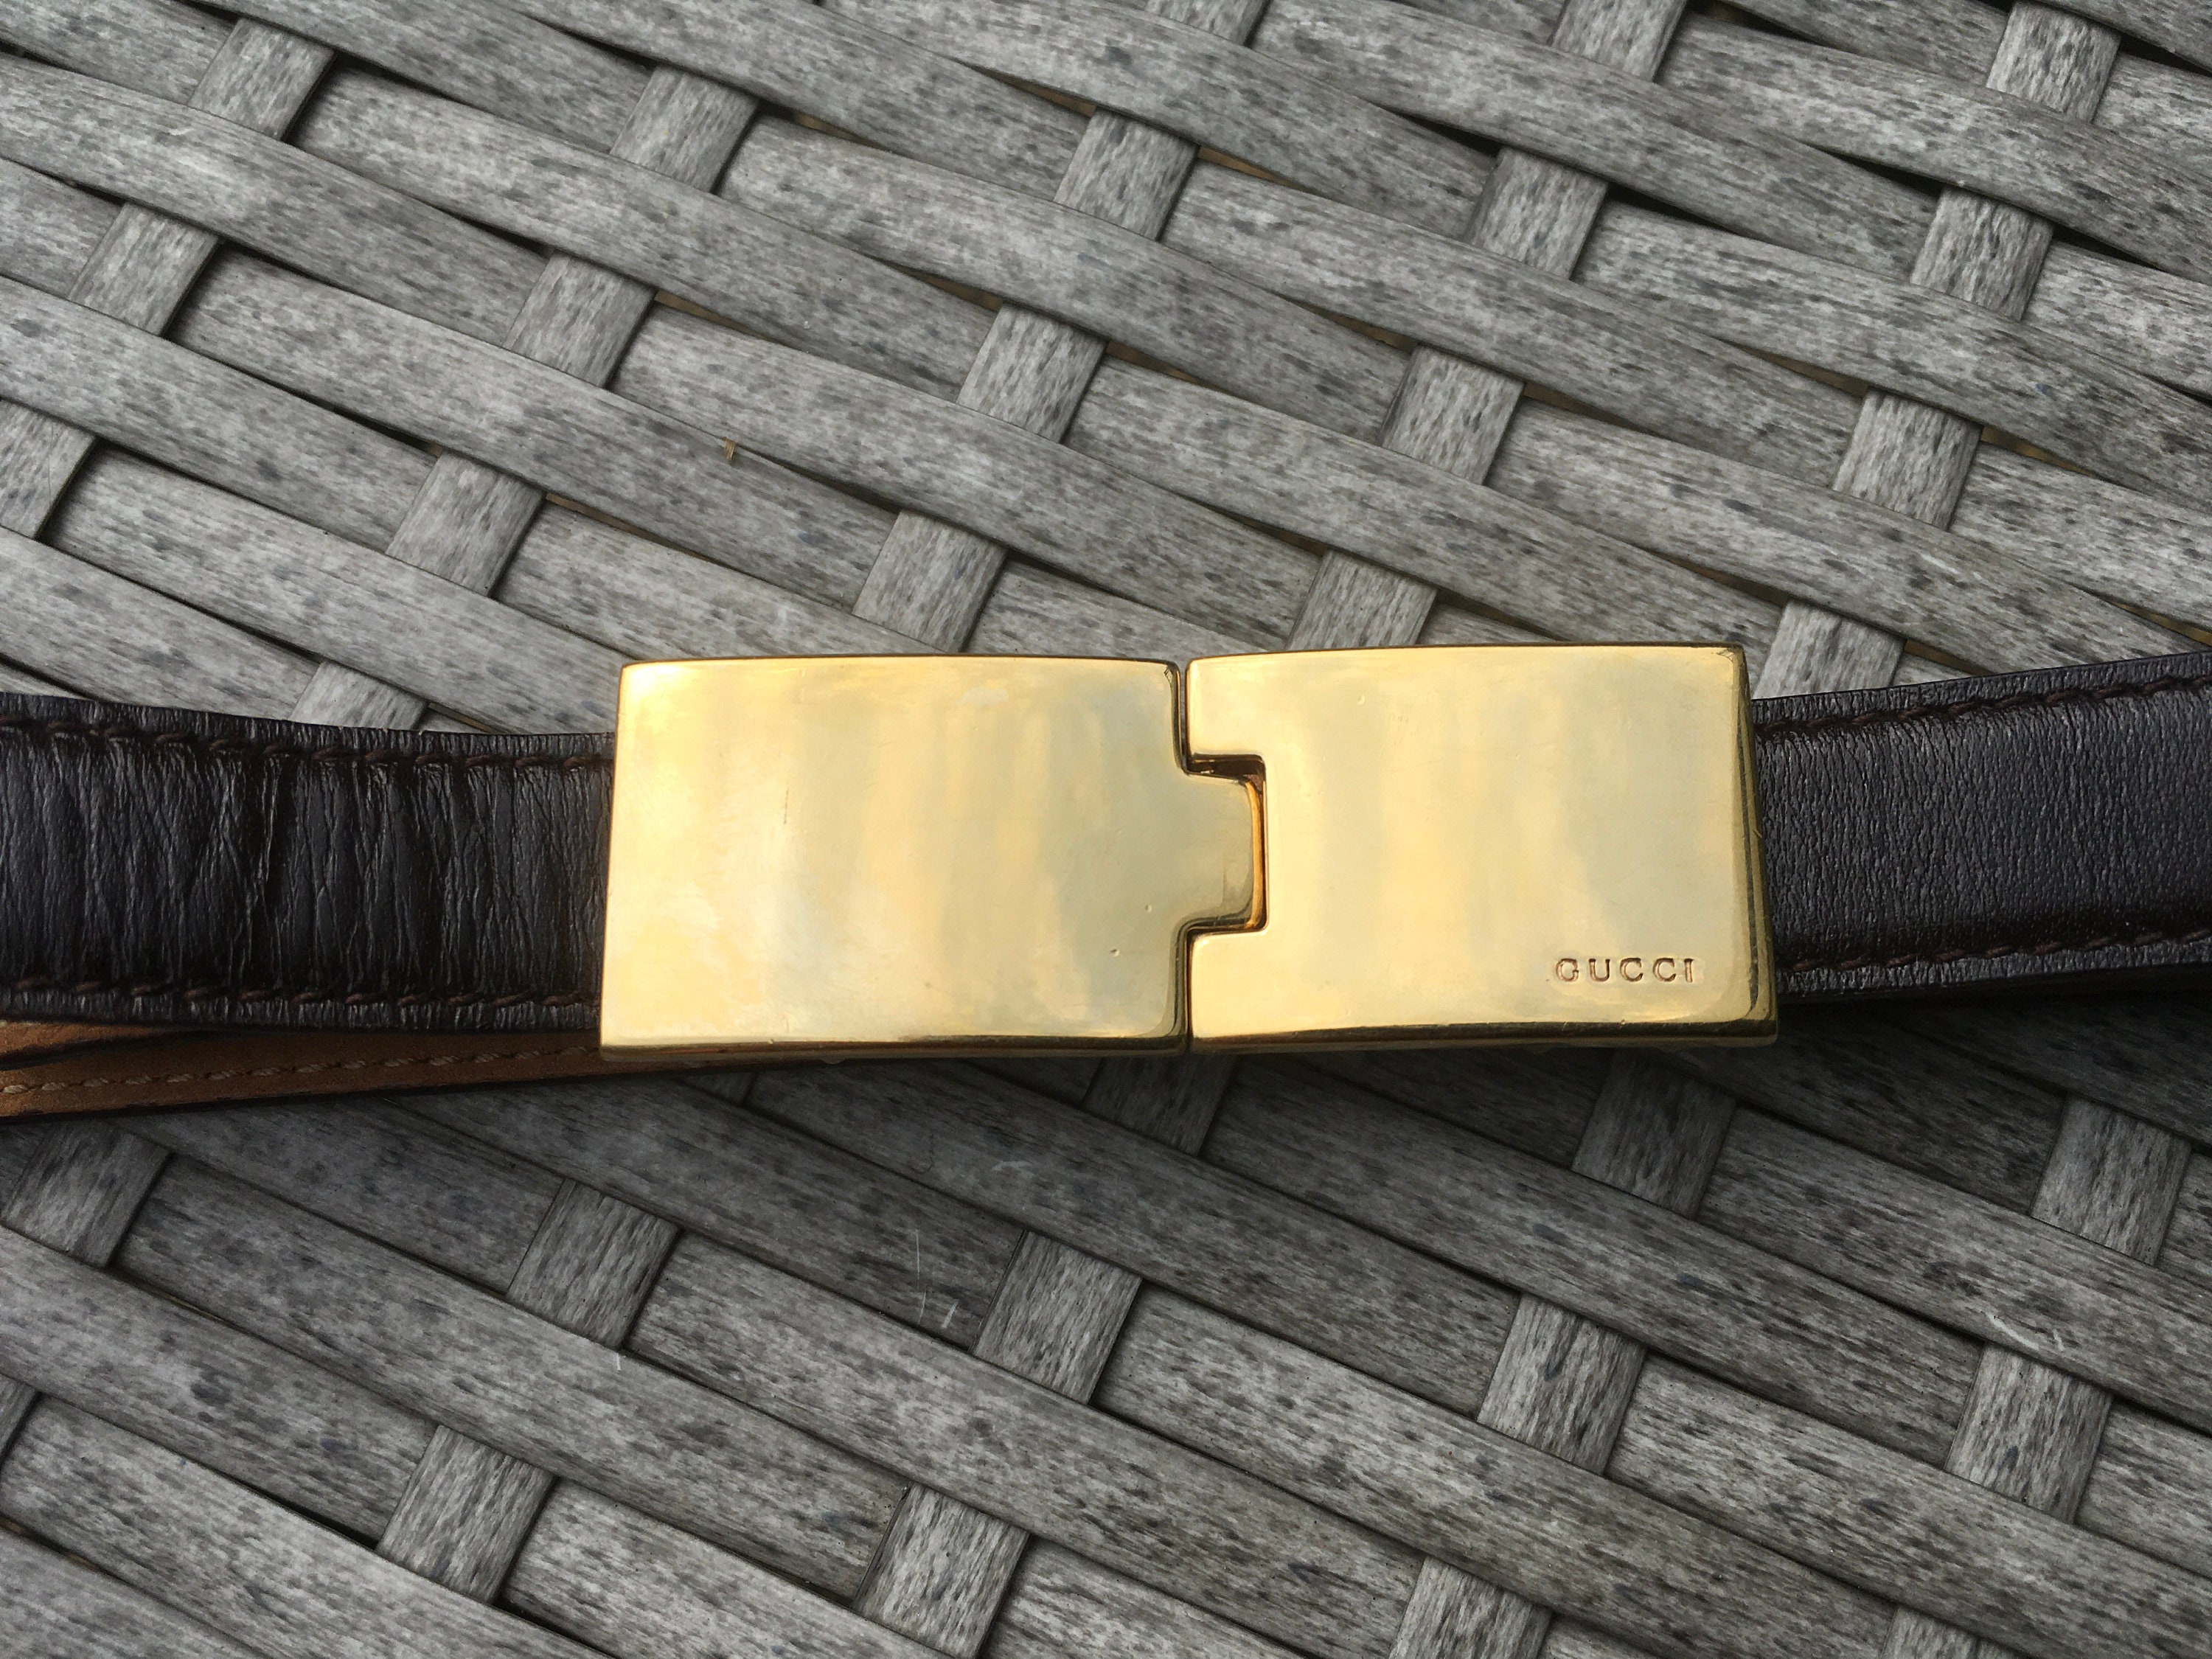 Immaculate Used Vintage Leather GUCCI Belt. Gold Buckle Butter |